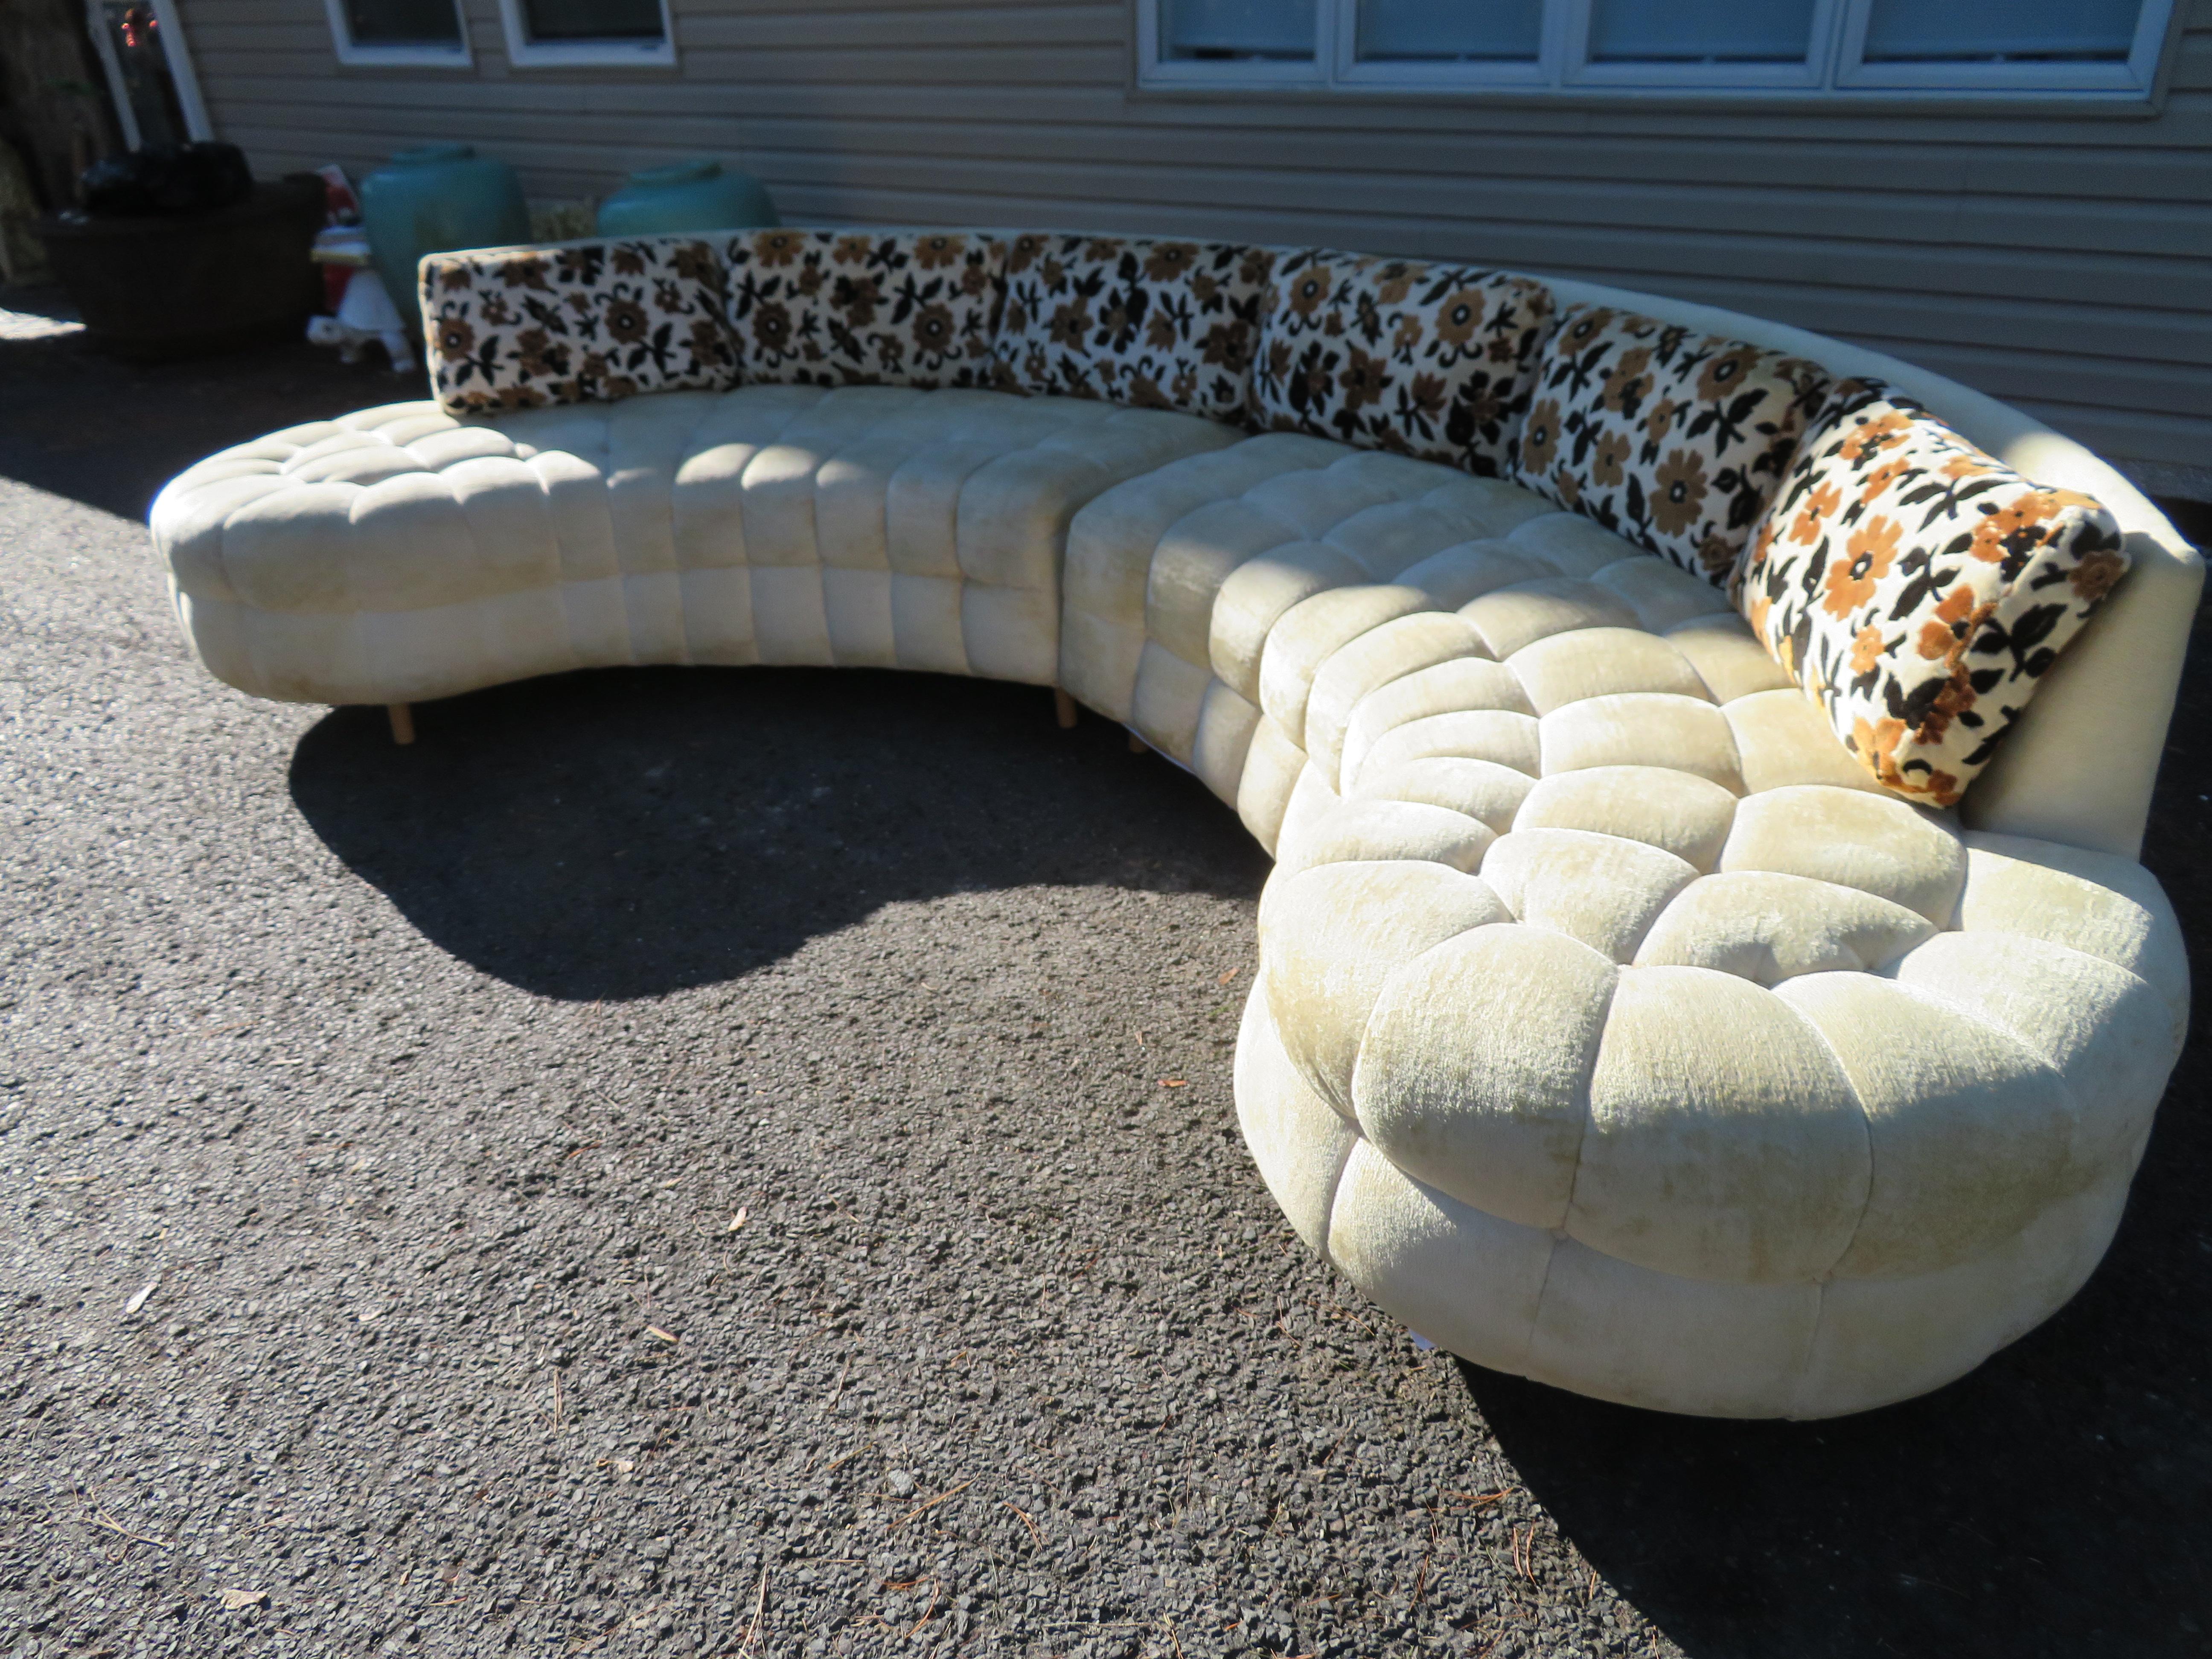 Wonderful curved serpentine two-piece Adrian Pearsall style sofa sectional. There are no words to describe how fabulous this sofa sectional is with its unusual biscuit tufting and curved serpentine shape. This set definitely needs to be